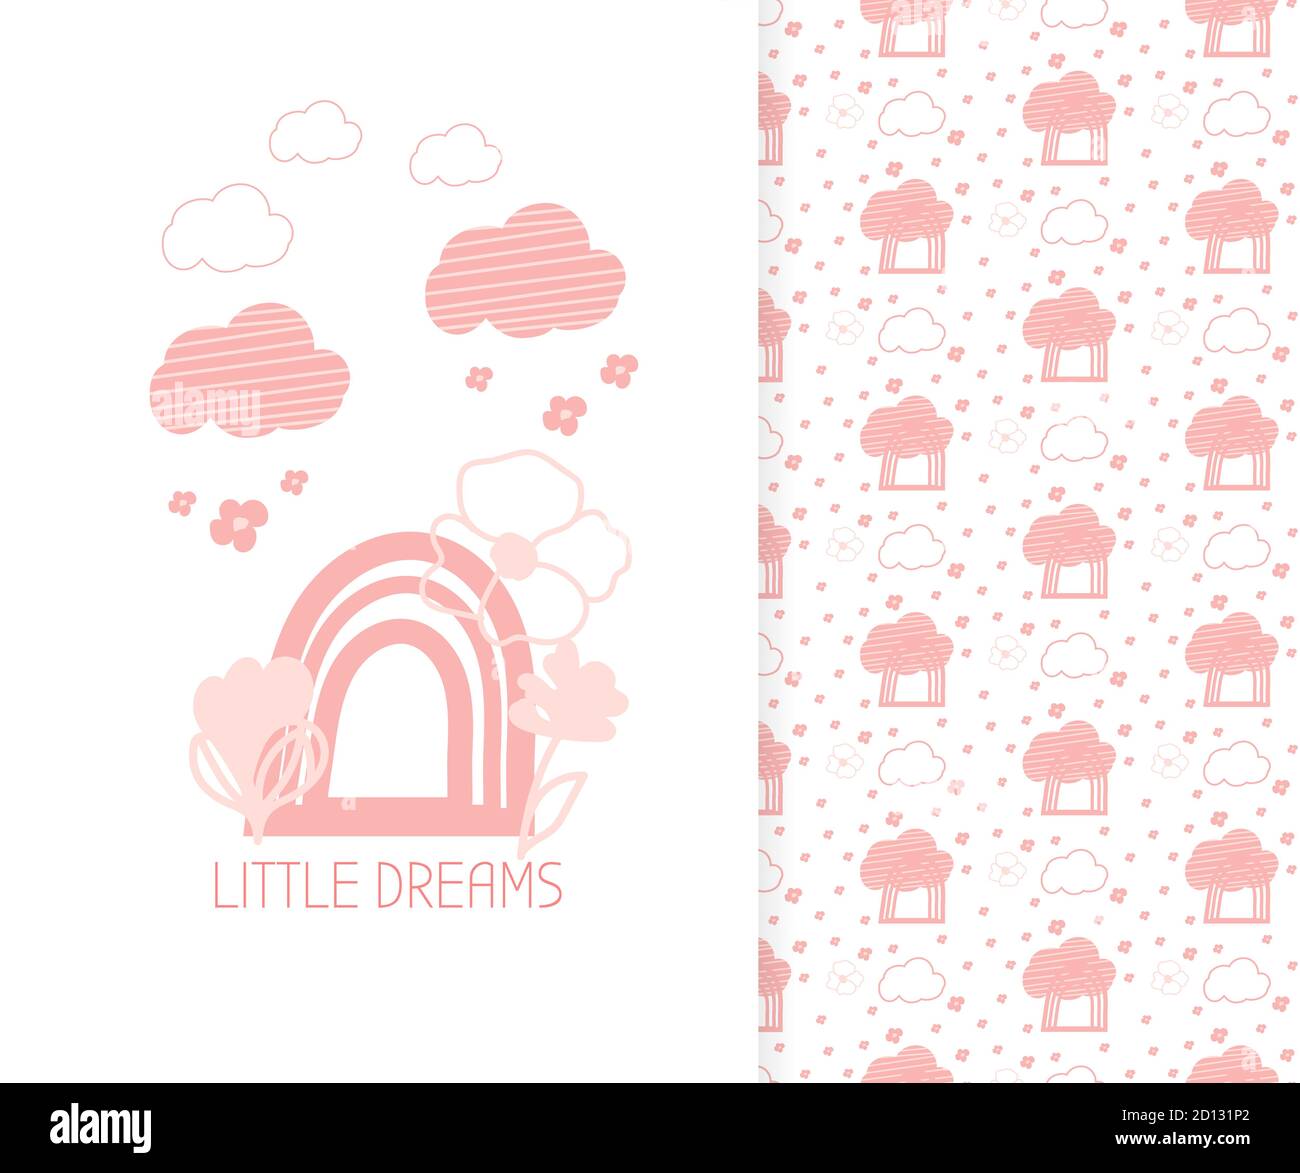 Kids banner. Cute pink doodle cloud seamless pattern. Pastel tileable background of hand drawn clouds with lines, flower and rainbow. Great for fabric, paper print, wallpaper decor Vector illustration Stock Vector